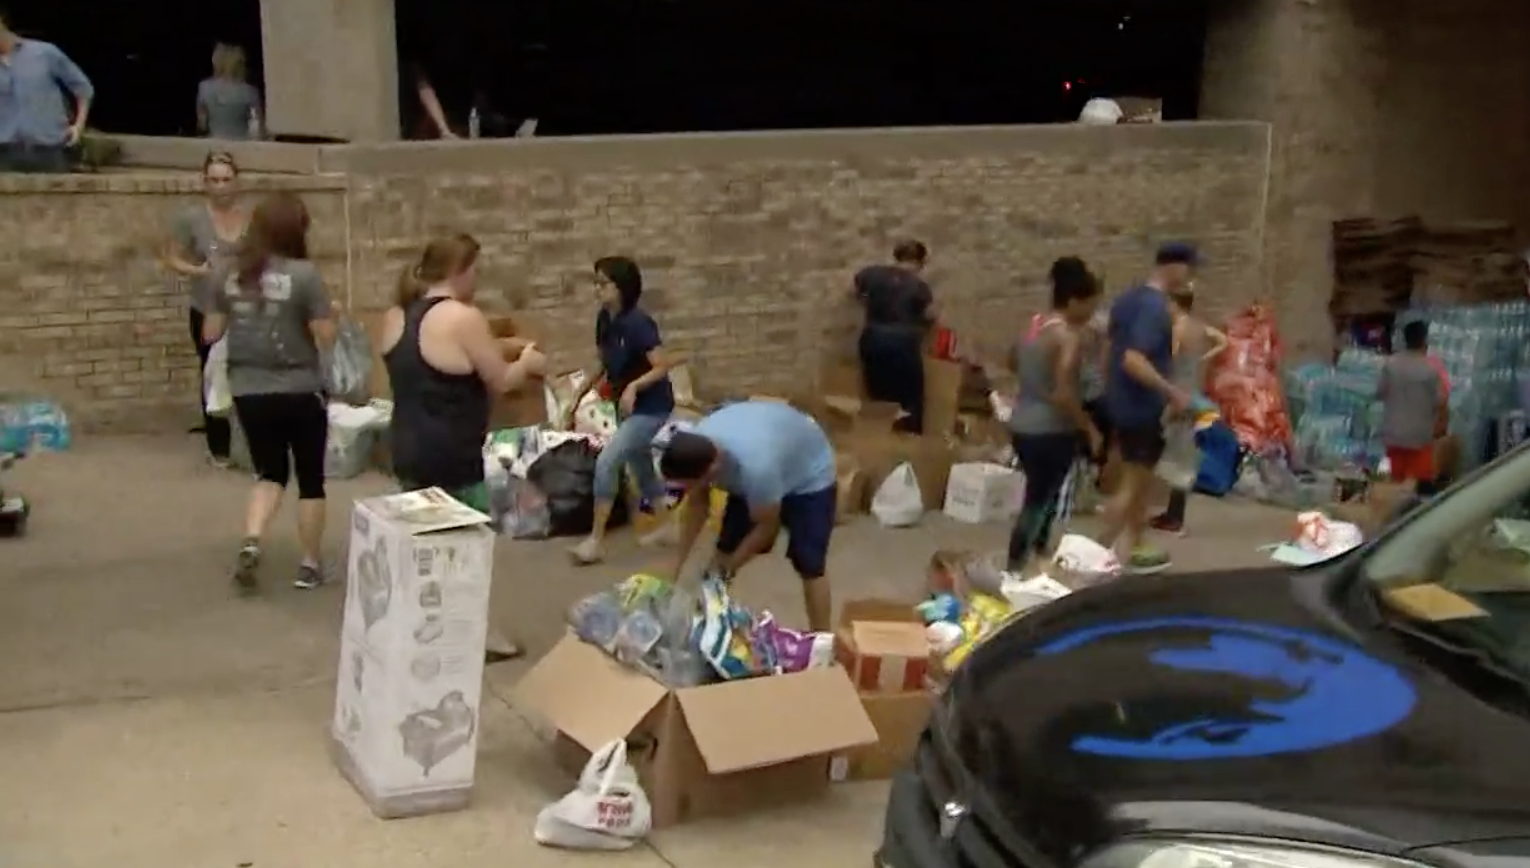 wfaa.com | Dallas donation sites dealing with overflow, needs warehouse1530 x 868